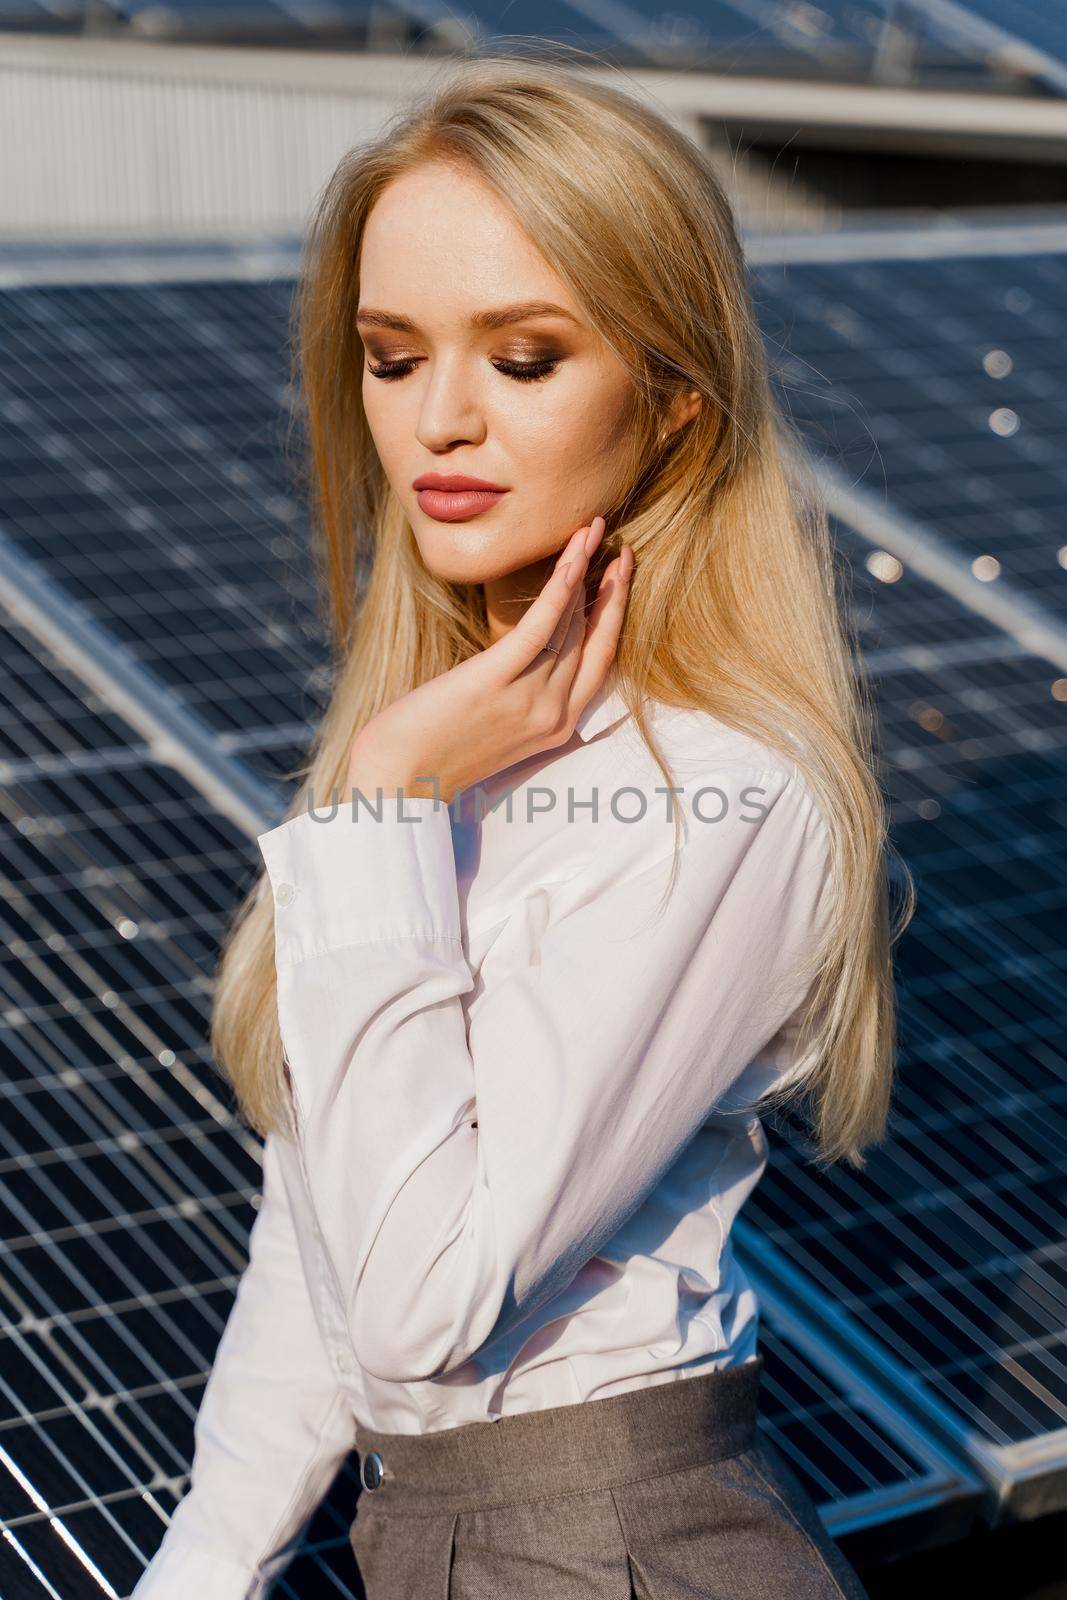 Close-up portrait of blonde model near solar panels. Free electricity for home. Green energy. Solar cells power plant business